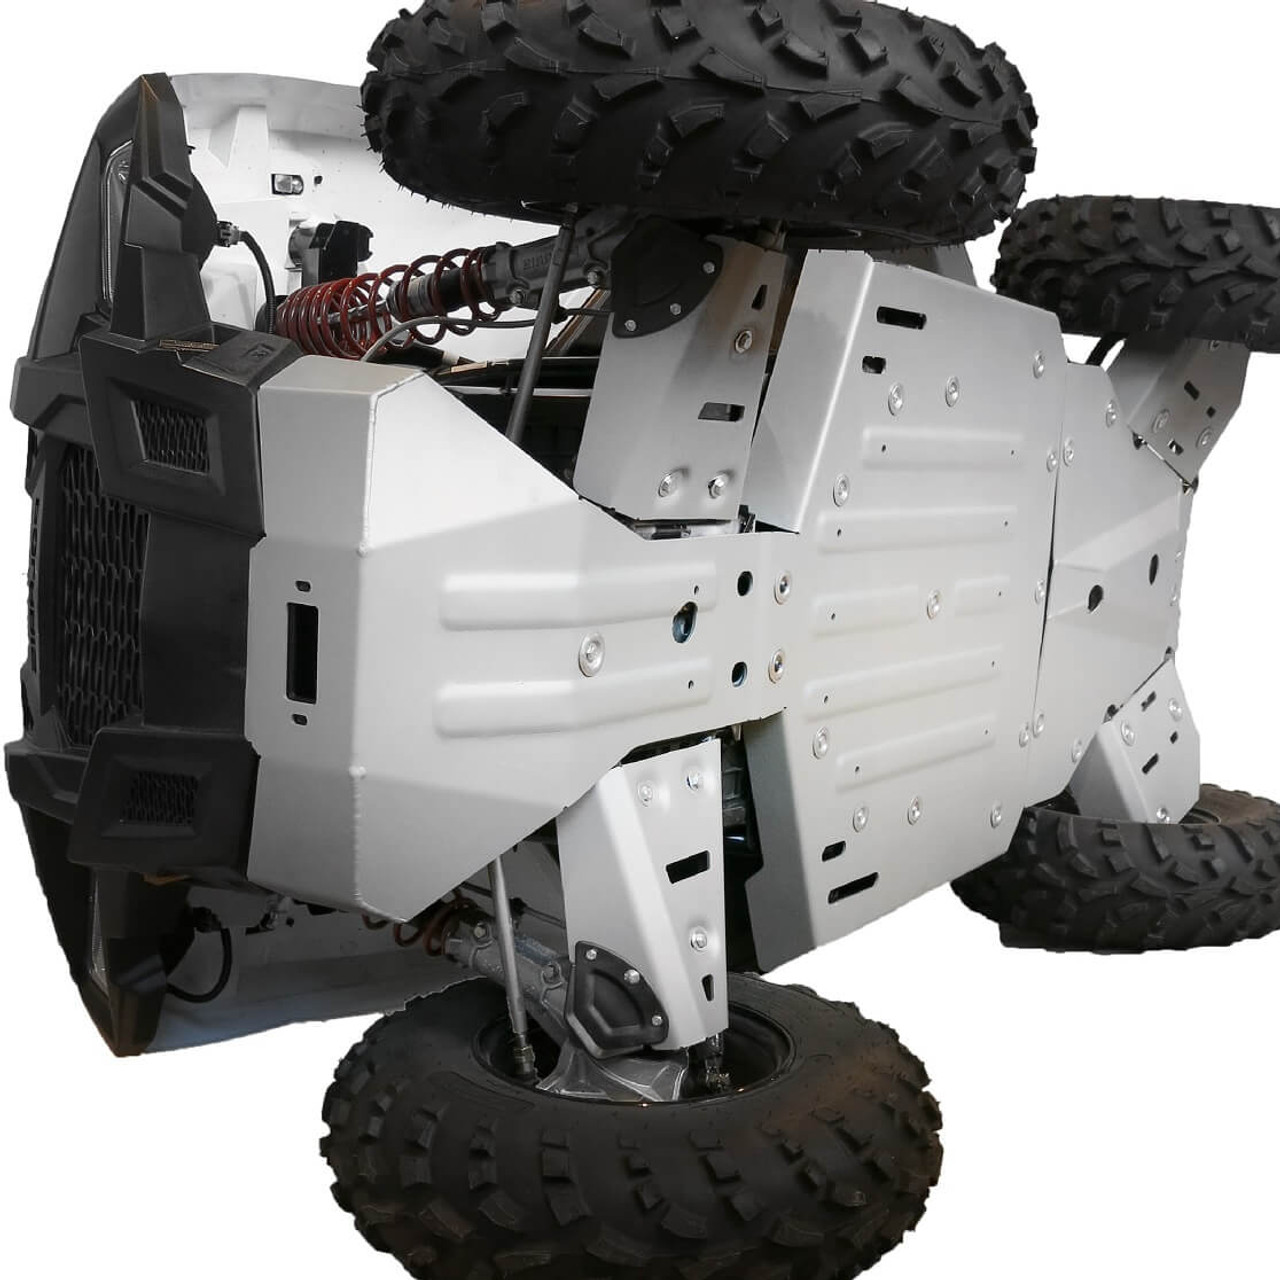 Rival Aluminum Skid Plate and Guards Kit Polaris ACE